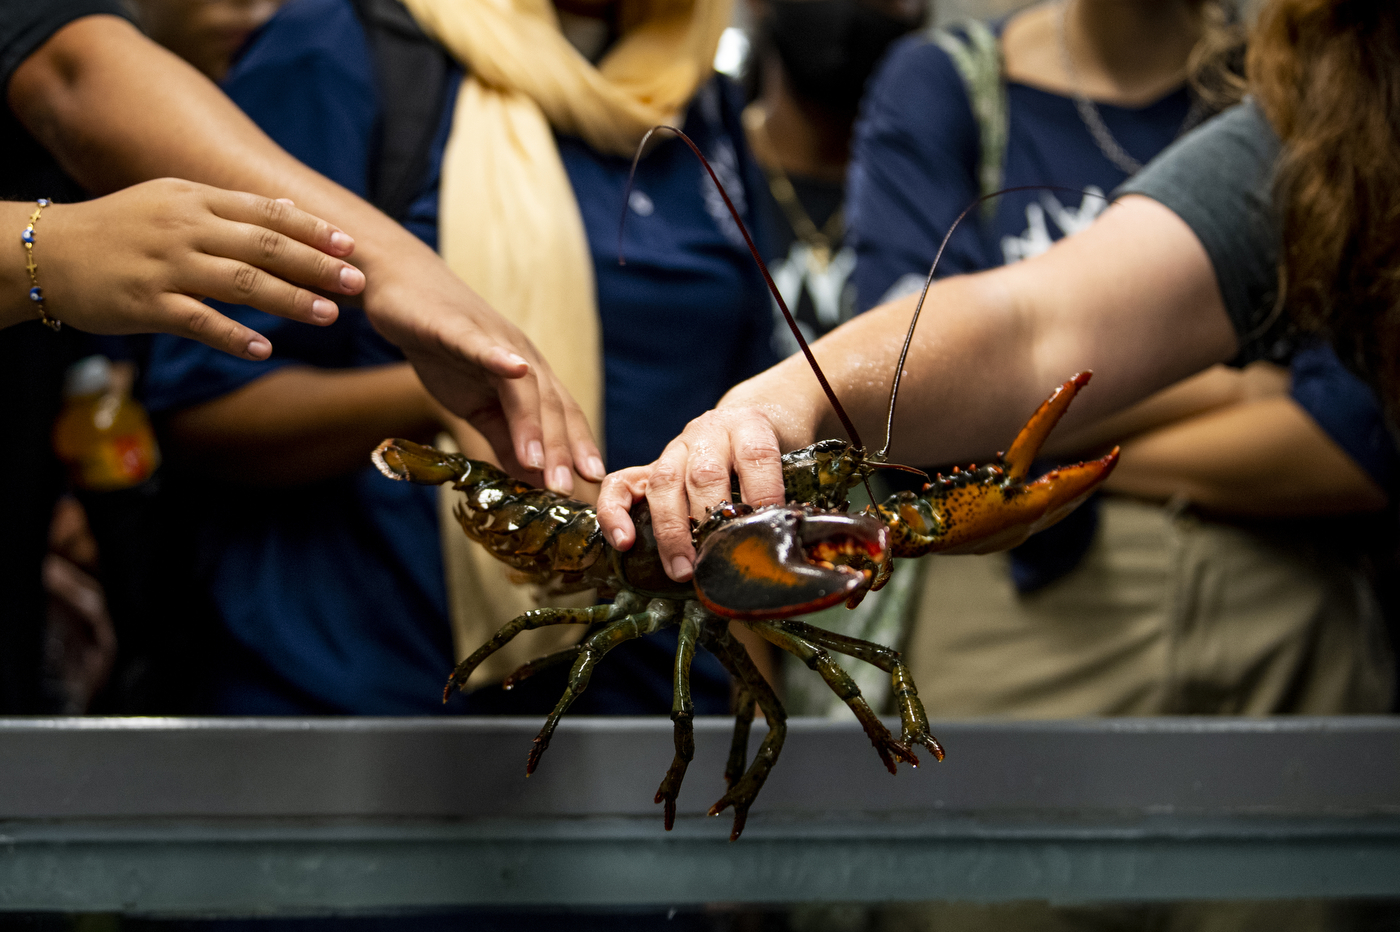 Many hands reach out towards a lobster